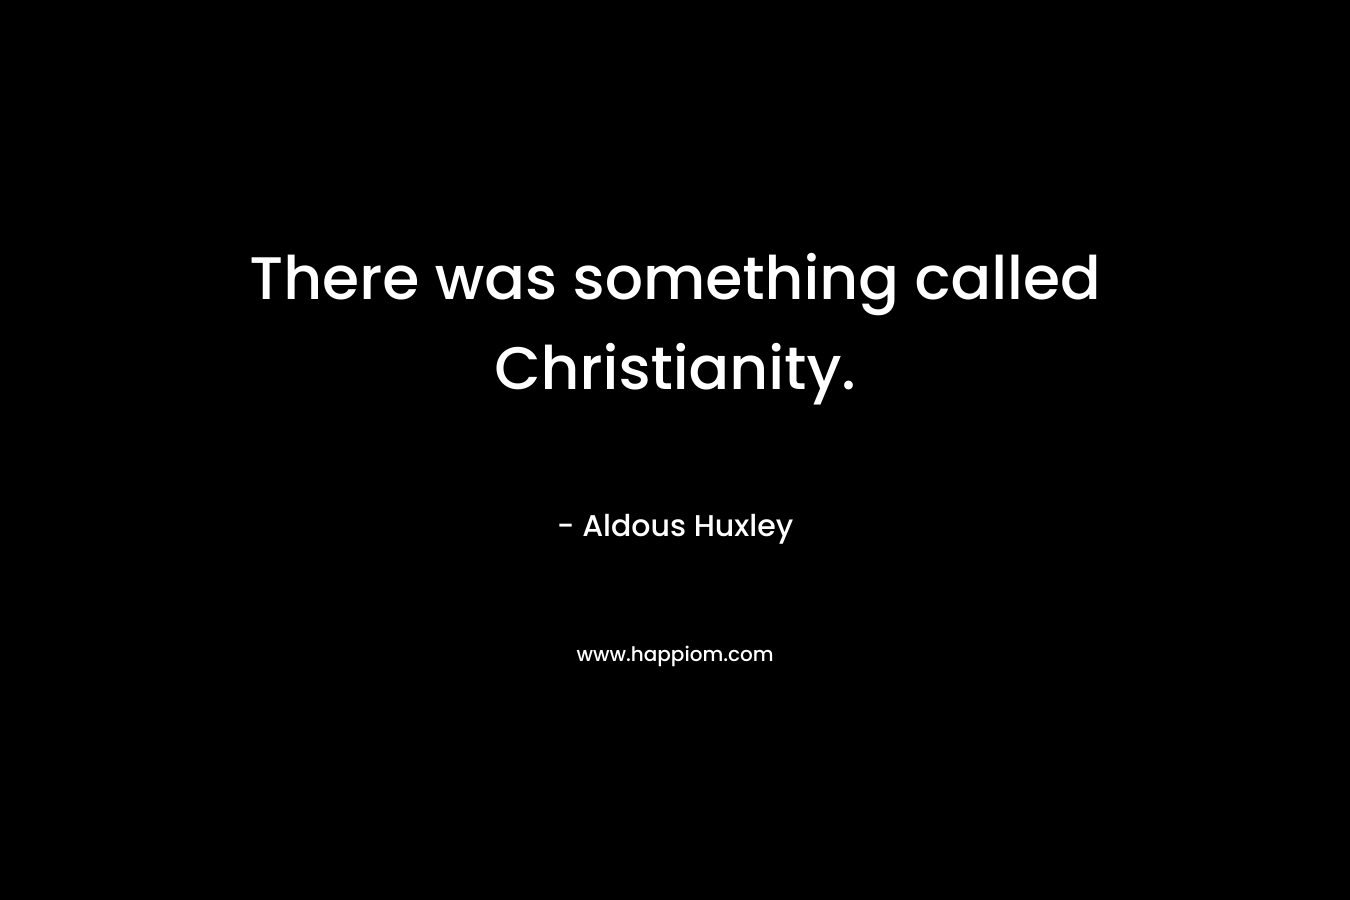 There was something called Christianity.